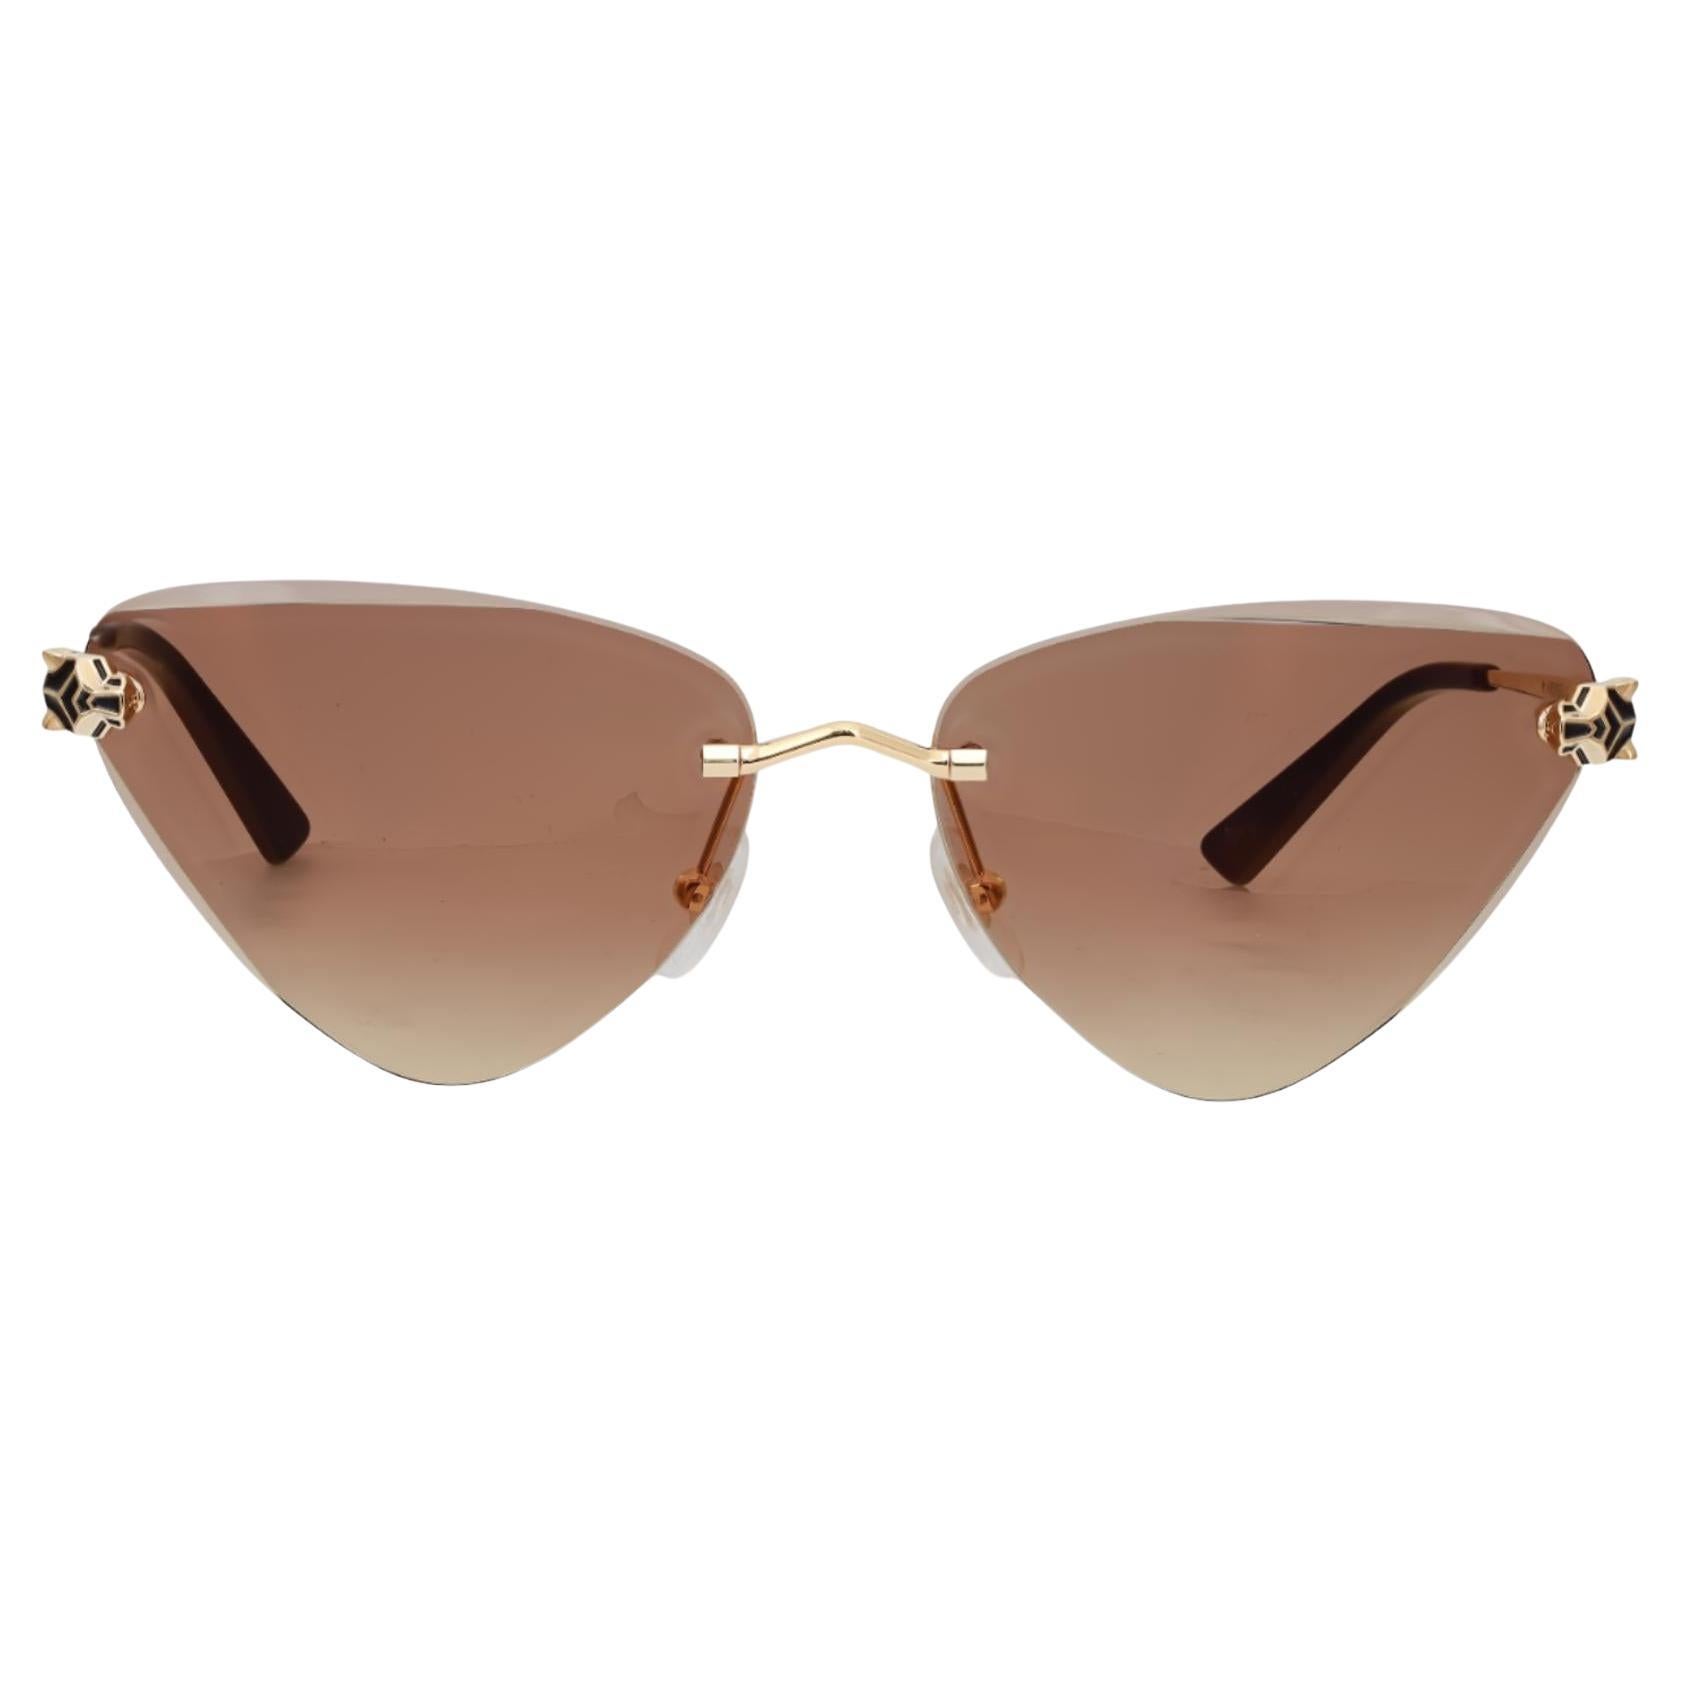 Cartier Panthere De Cartier Rimless Smooth Golden Finish Cats Eye Sunglasses For Sale